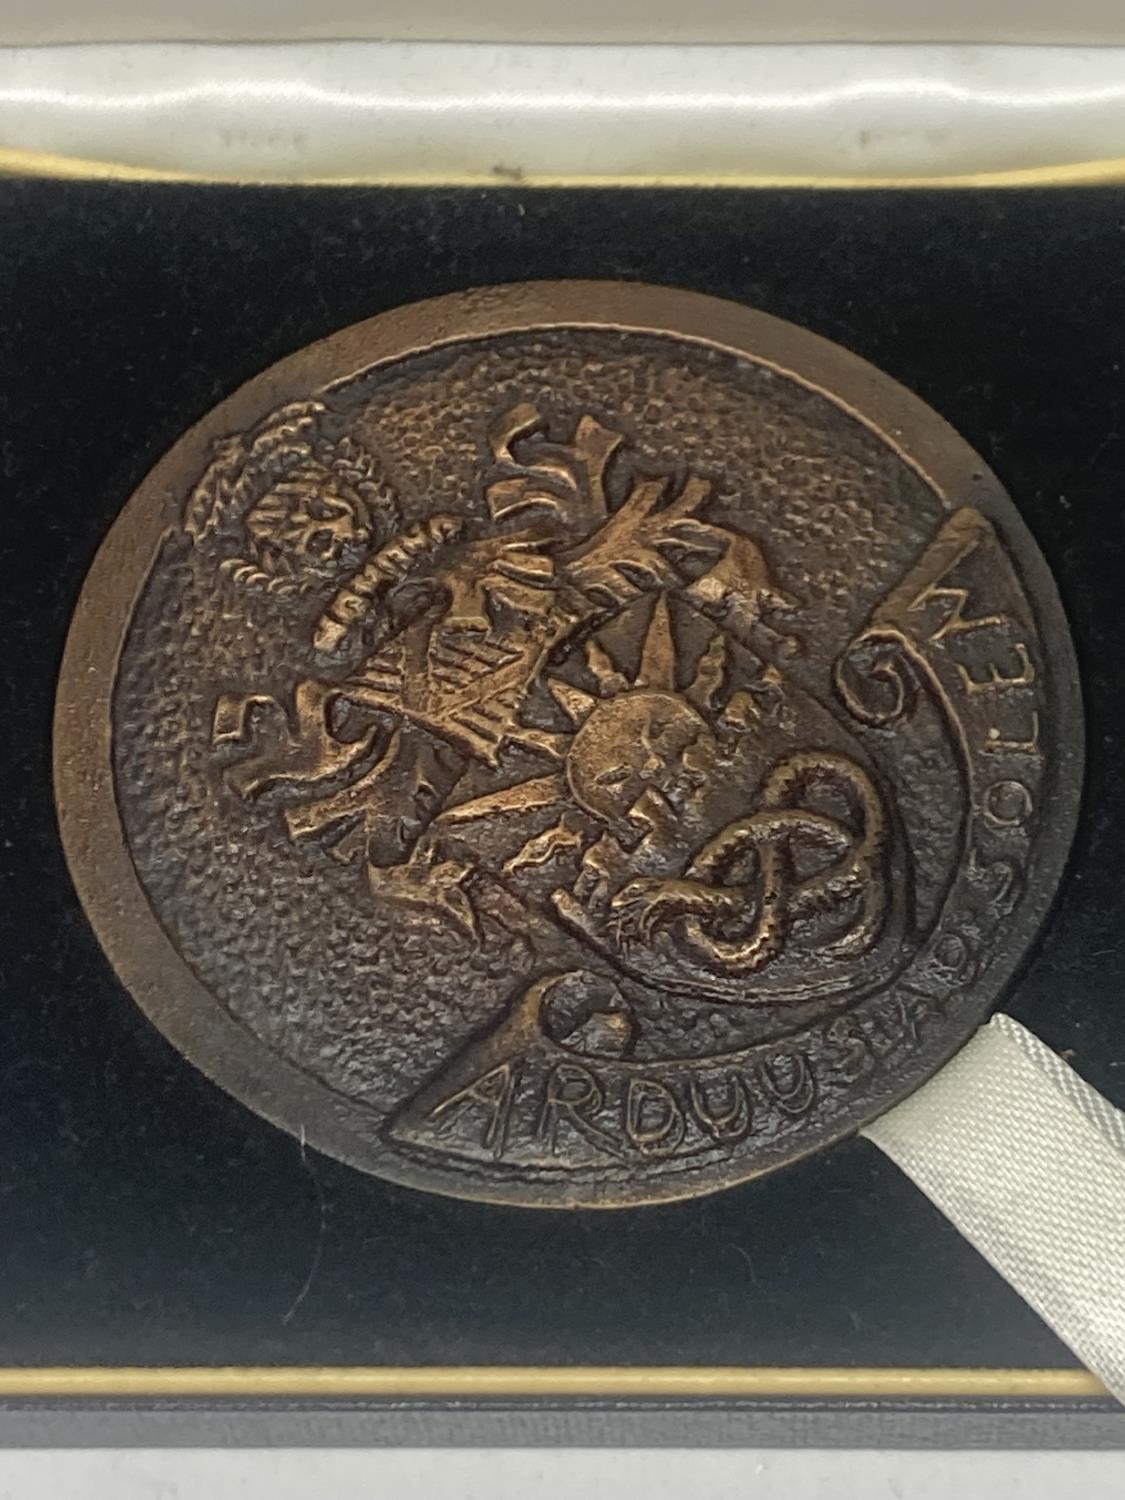 A LARGE BRONZE MEDAL VICTORIA UNIVERSITY OF MANCHESTER 1851 -2001 IN A PRESENTATION BOX - Image 2 of 6